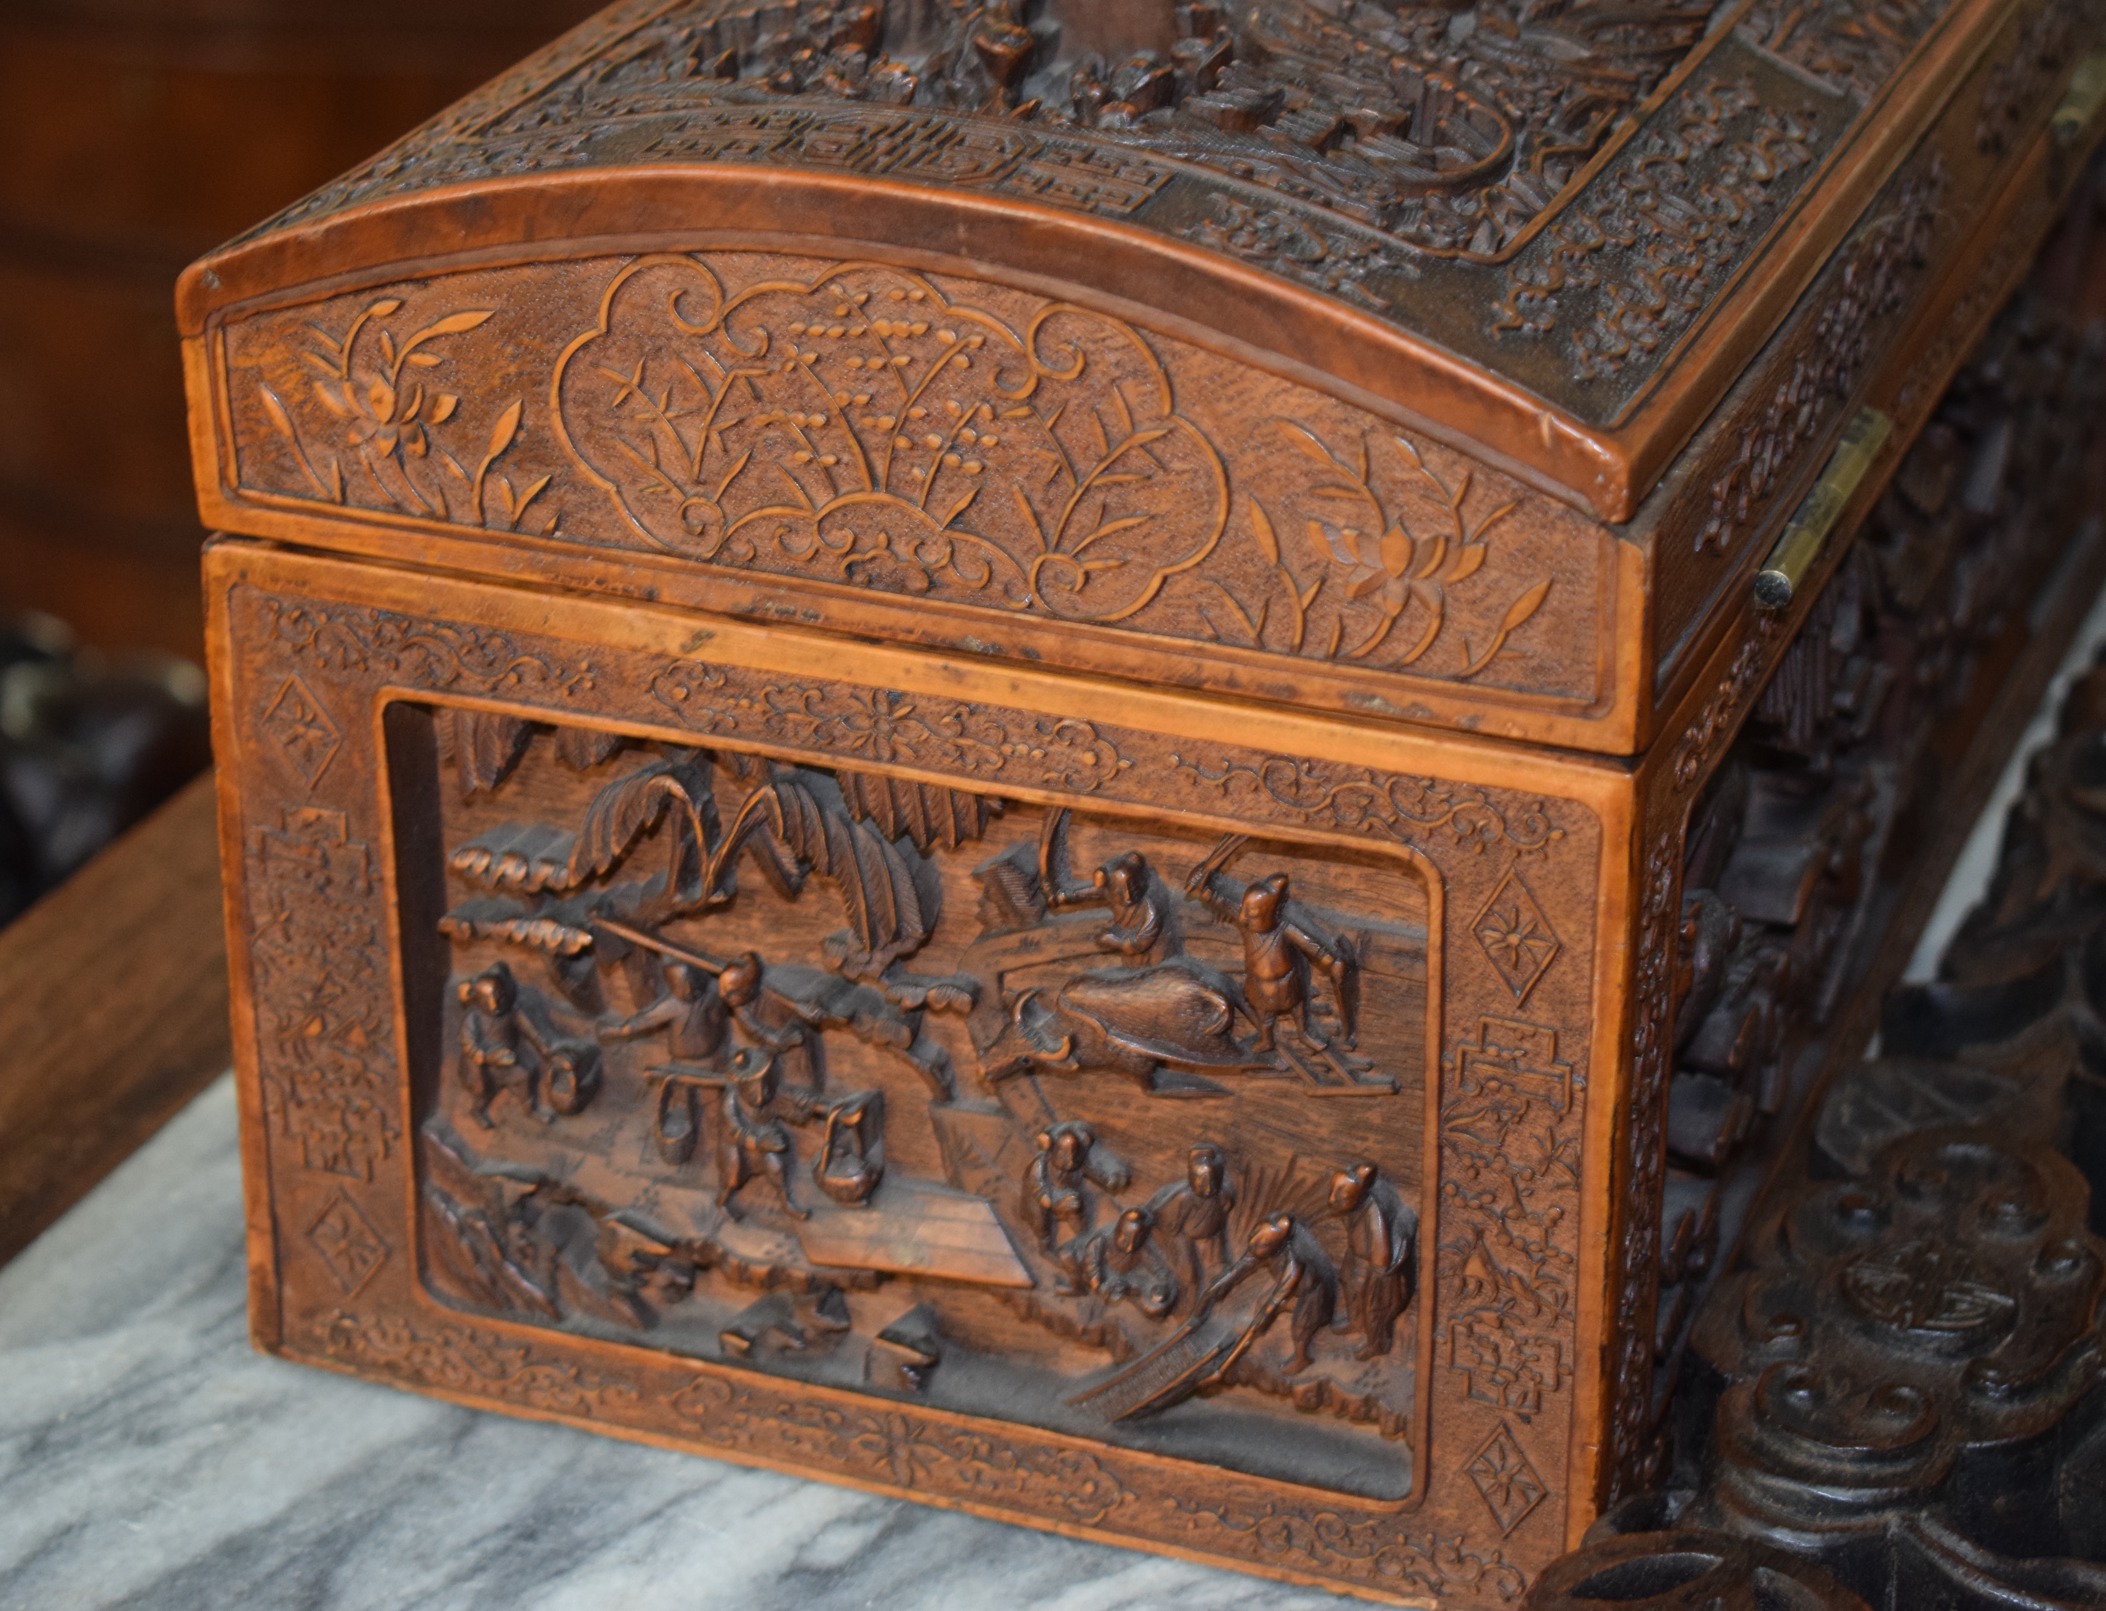 AN IMPORTANT LARGE 18TH/19TH CENTURY CHINESE CARVED SANDALWOOD CASKET AND COVER by Sung Sing Gung, - Bild 7 aus 7